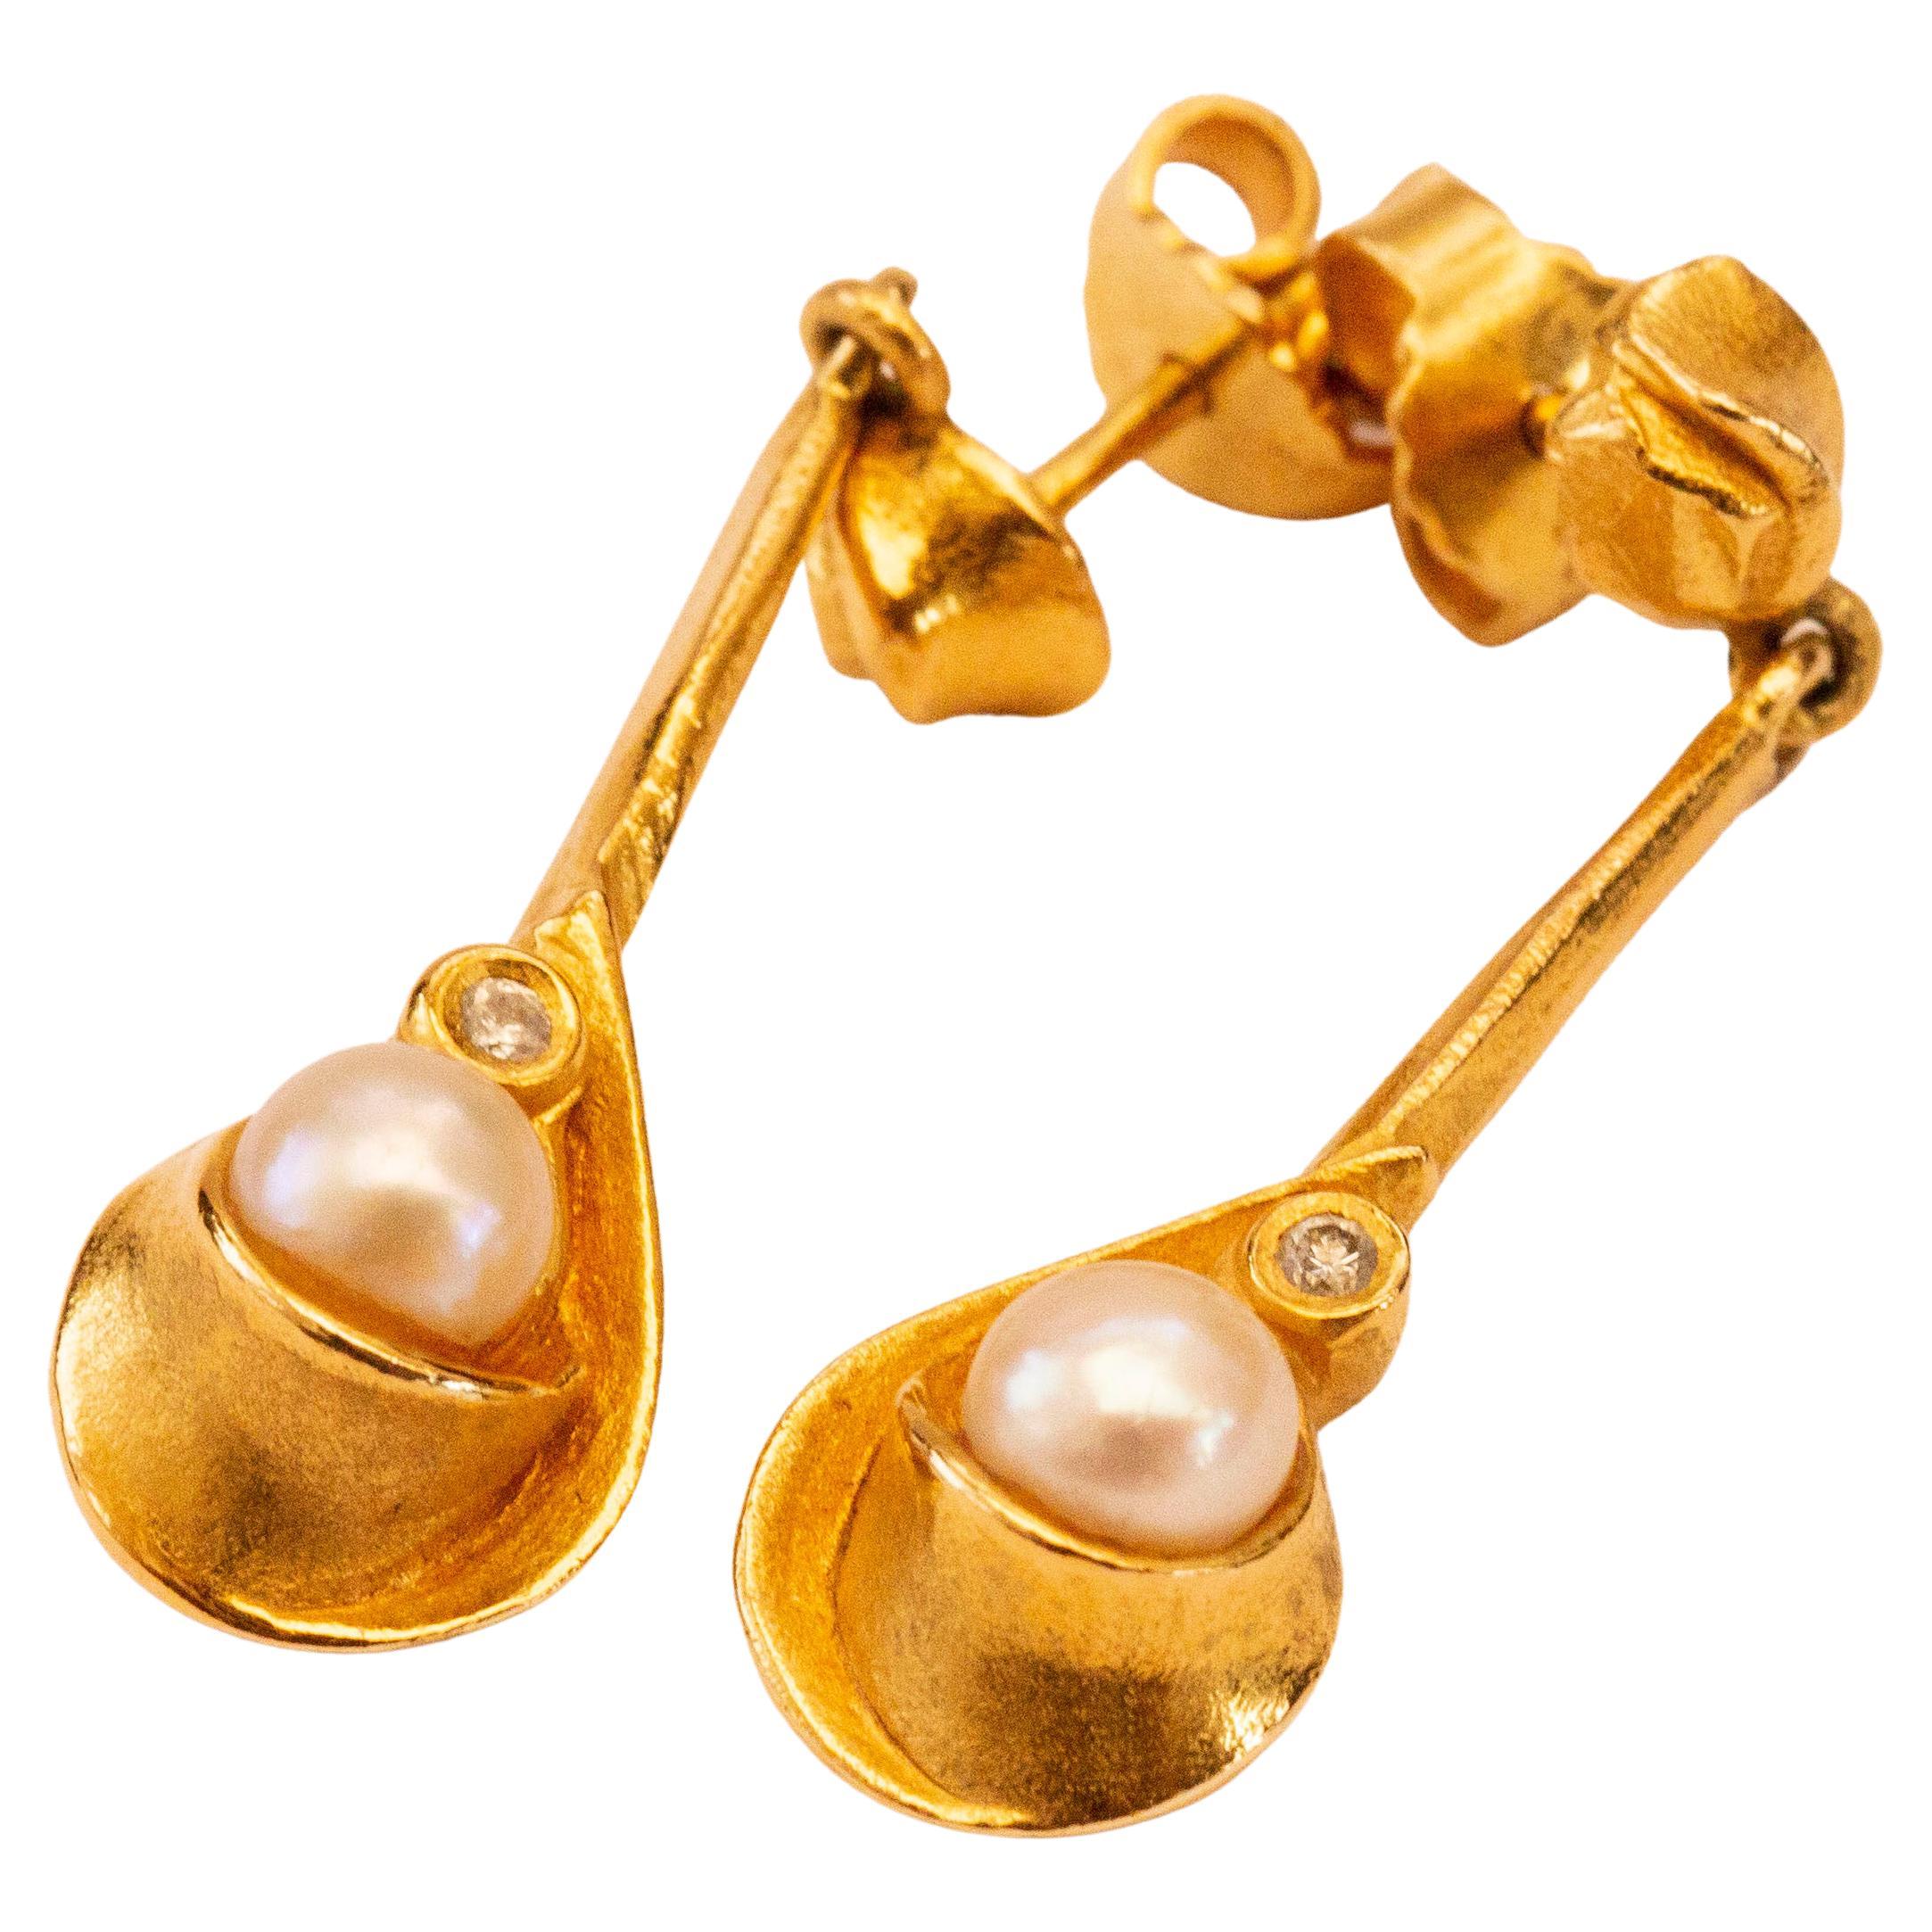 A Pair of 14 Karat Yellow Gold Earrings with Akoya Pearl and Diamond